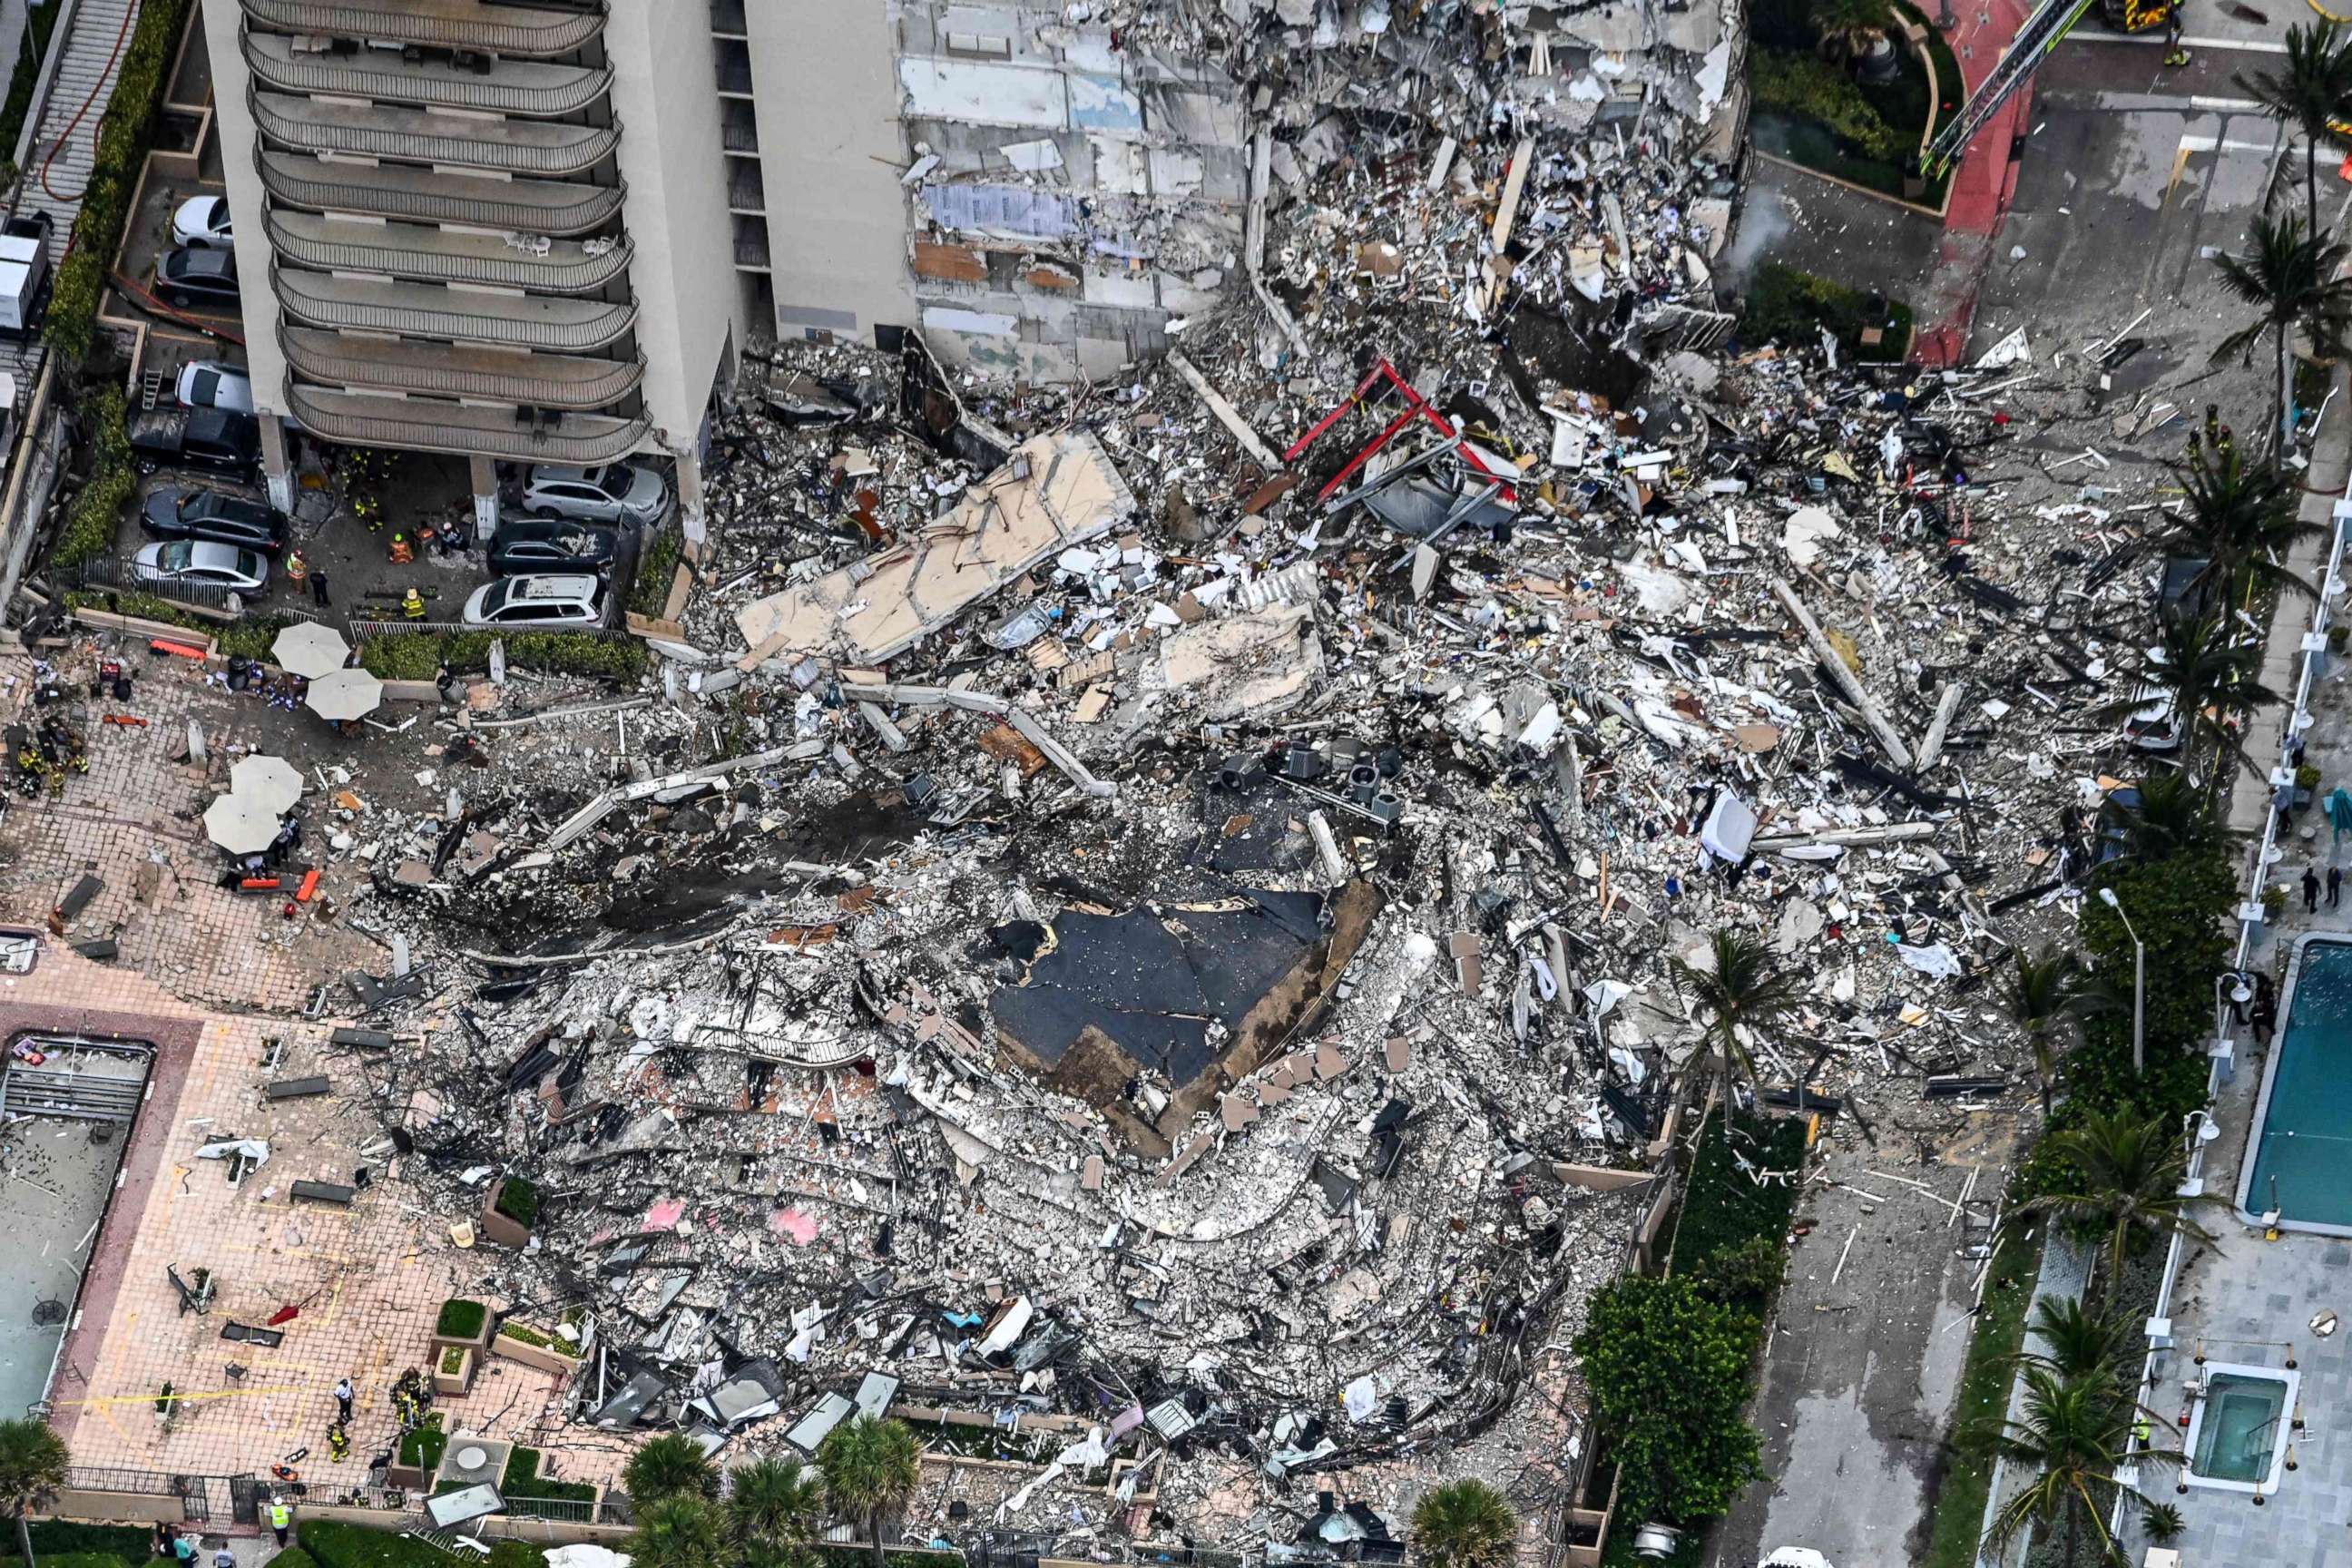 PHOTO: (FILES) In this file aerial view, shows search and rescue personnel working on site after the partial collapse of the Champlain Towers South in Surfside, north of Miami Beach, on June 24, 2021. 